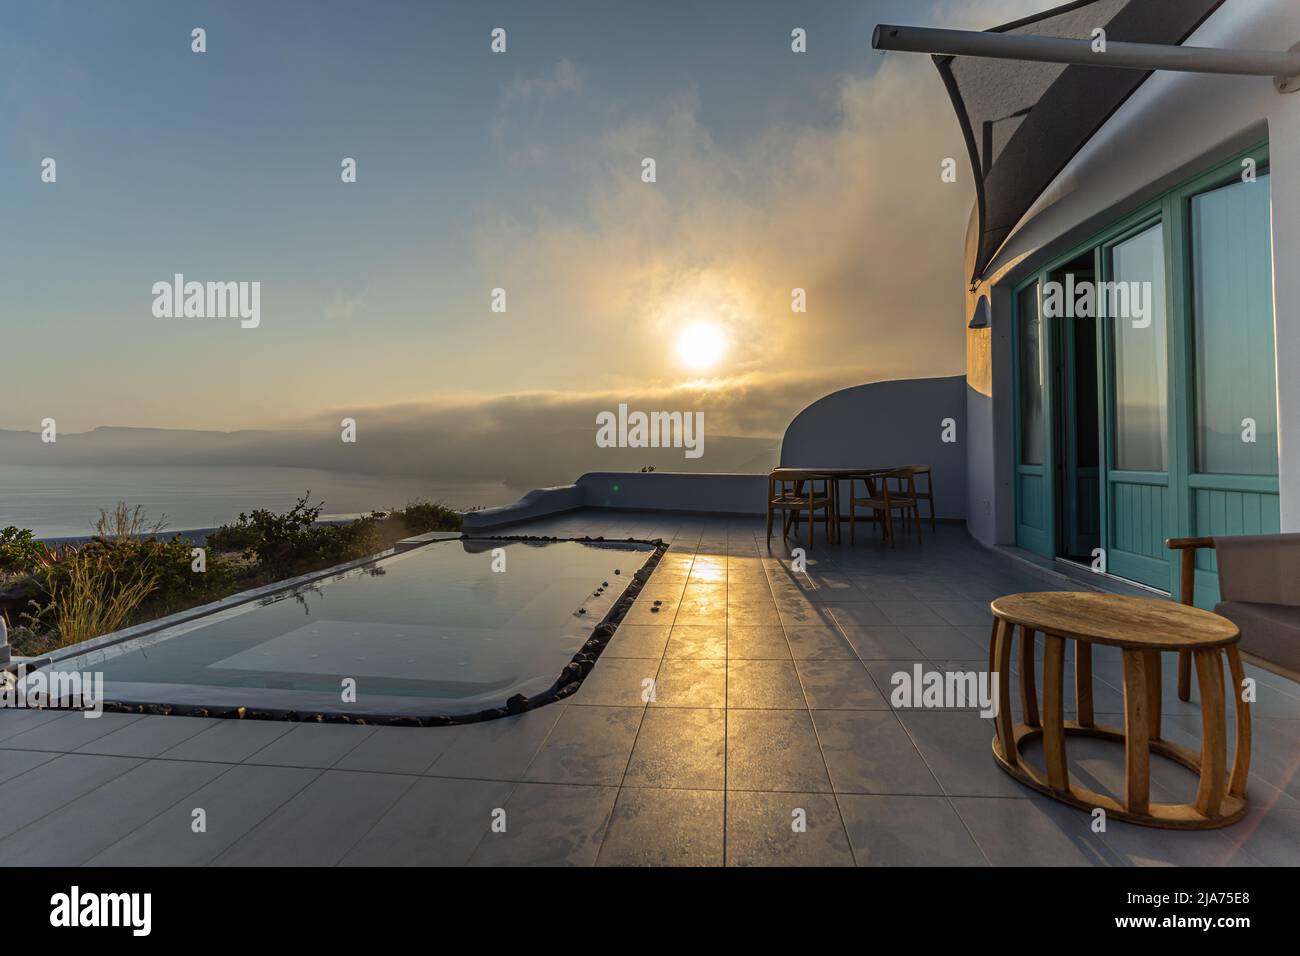 A pool on the patio of an elegant apartment reflects the early morning sunlight Stock Photo